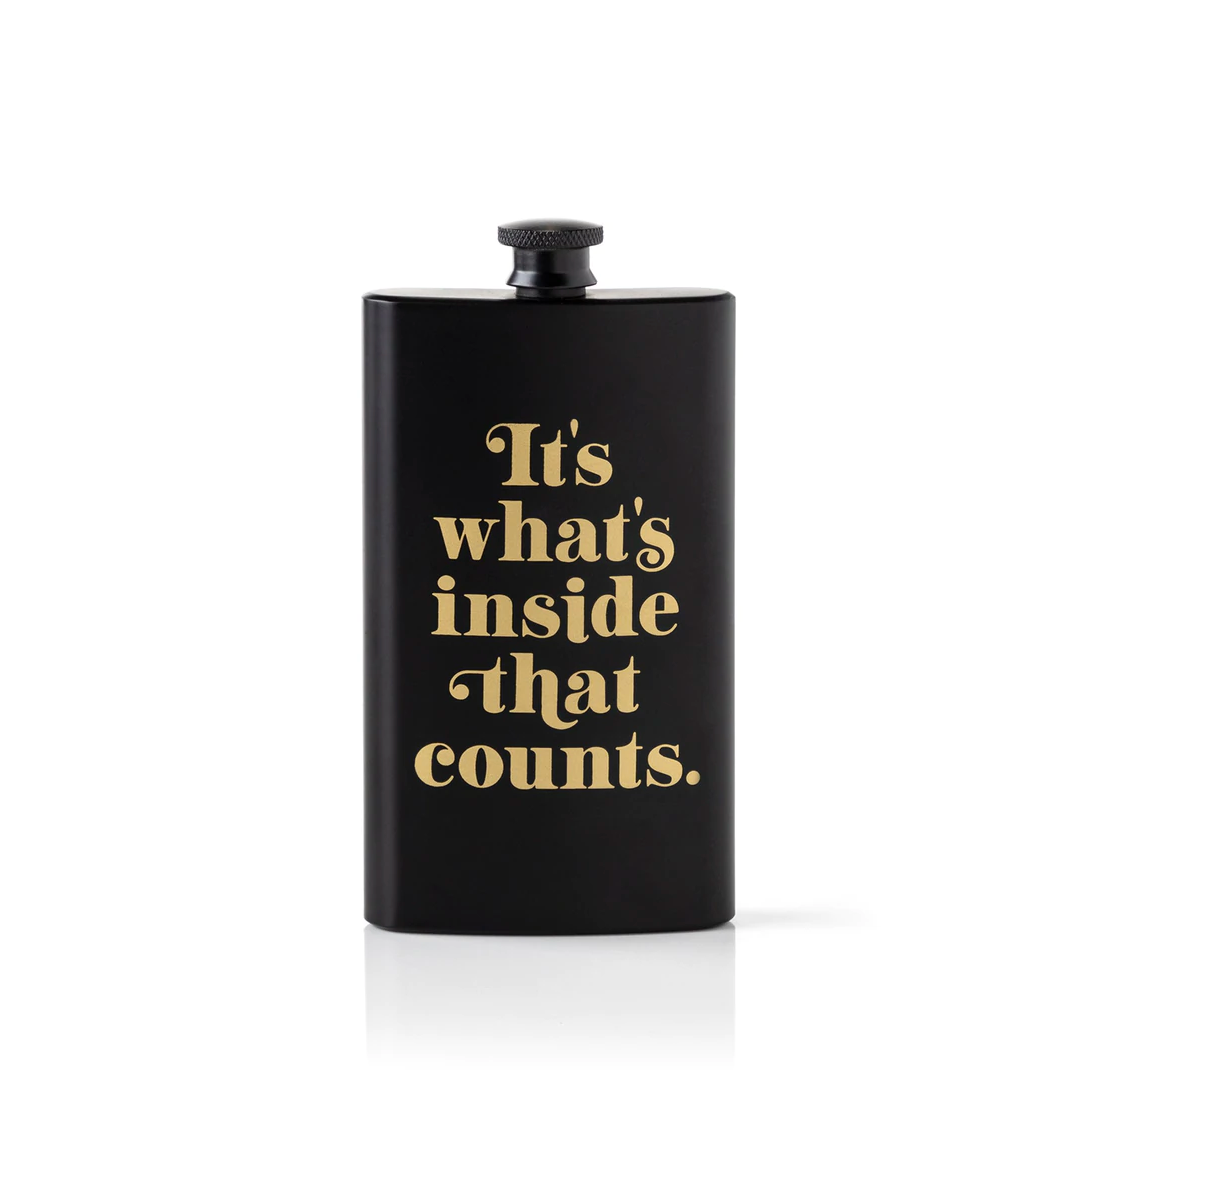 IT'S WHAT'S INSIDE THAT COUNTS POCKET FLASK